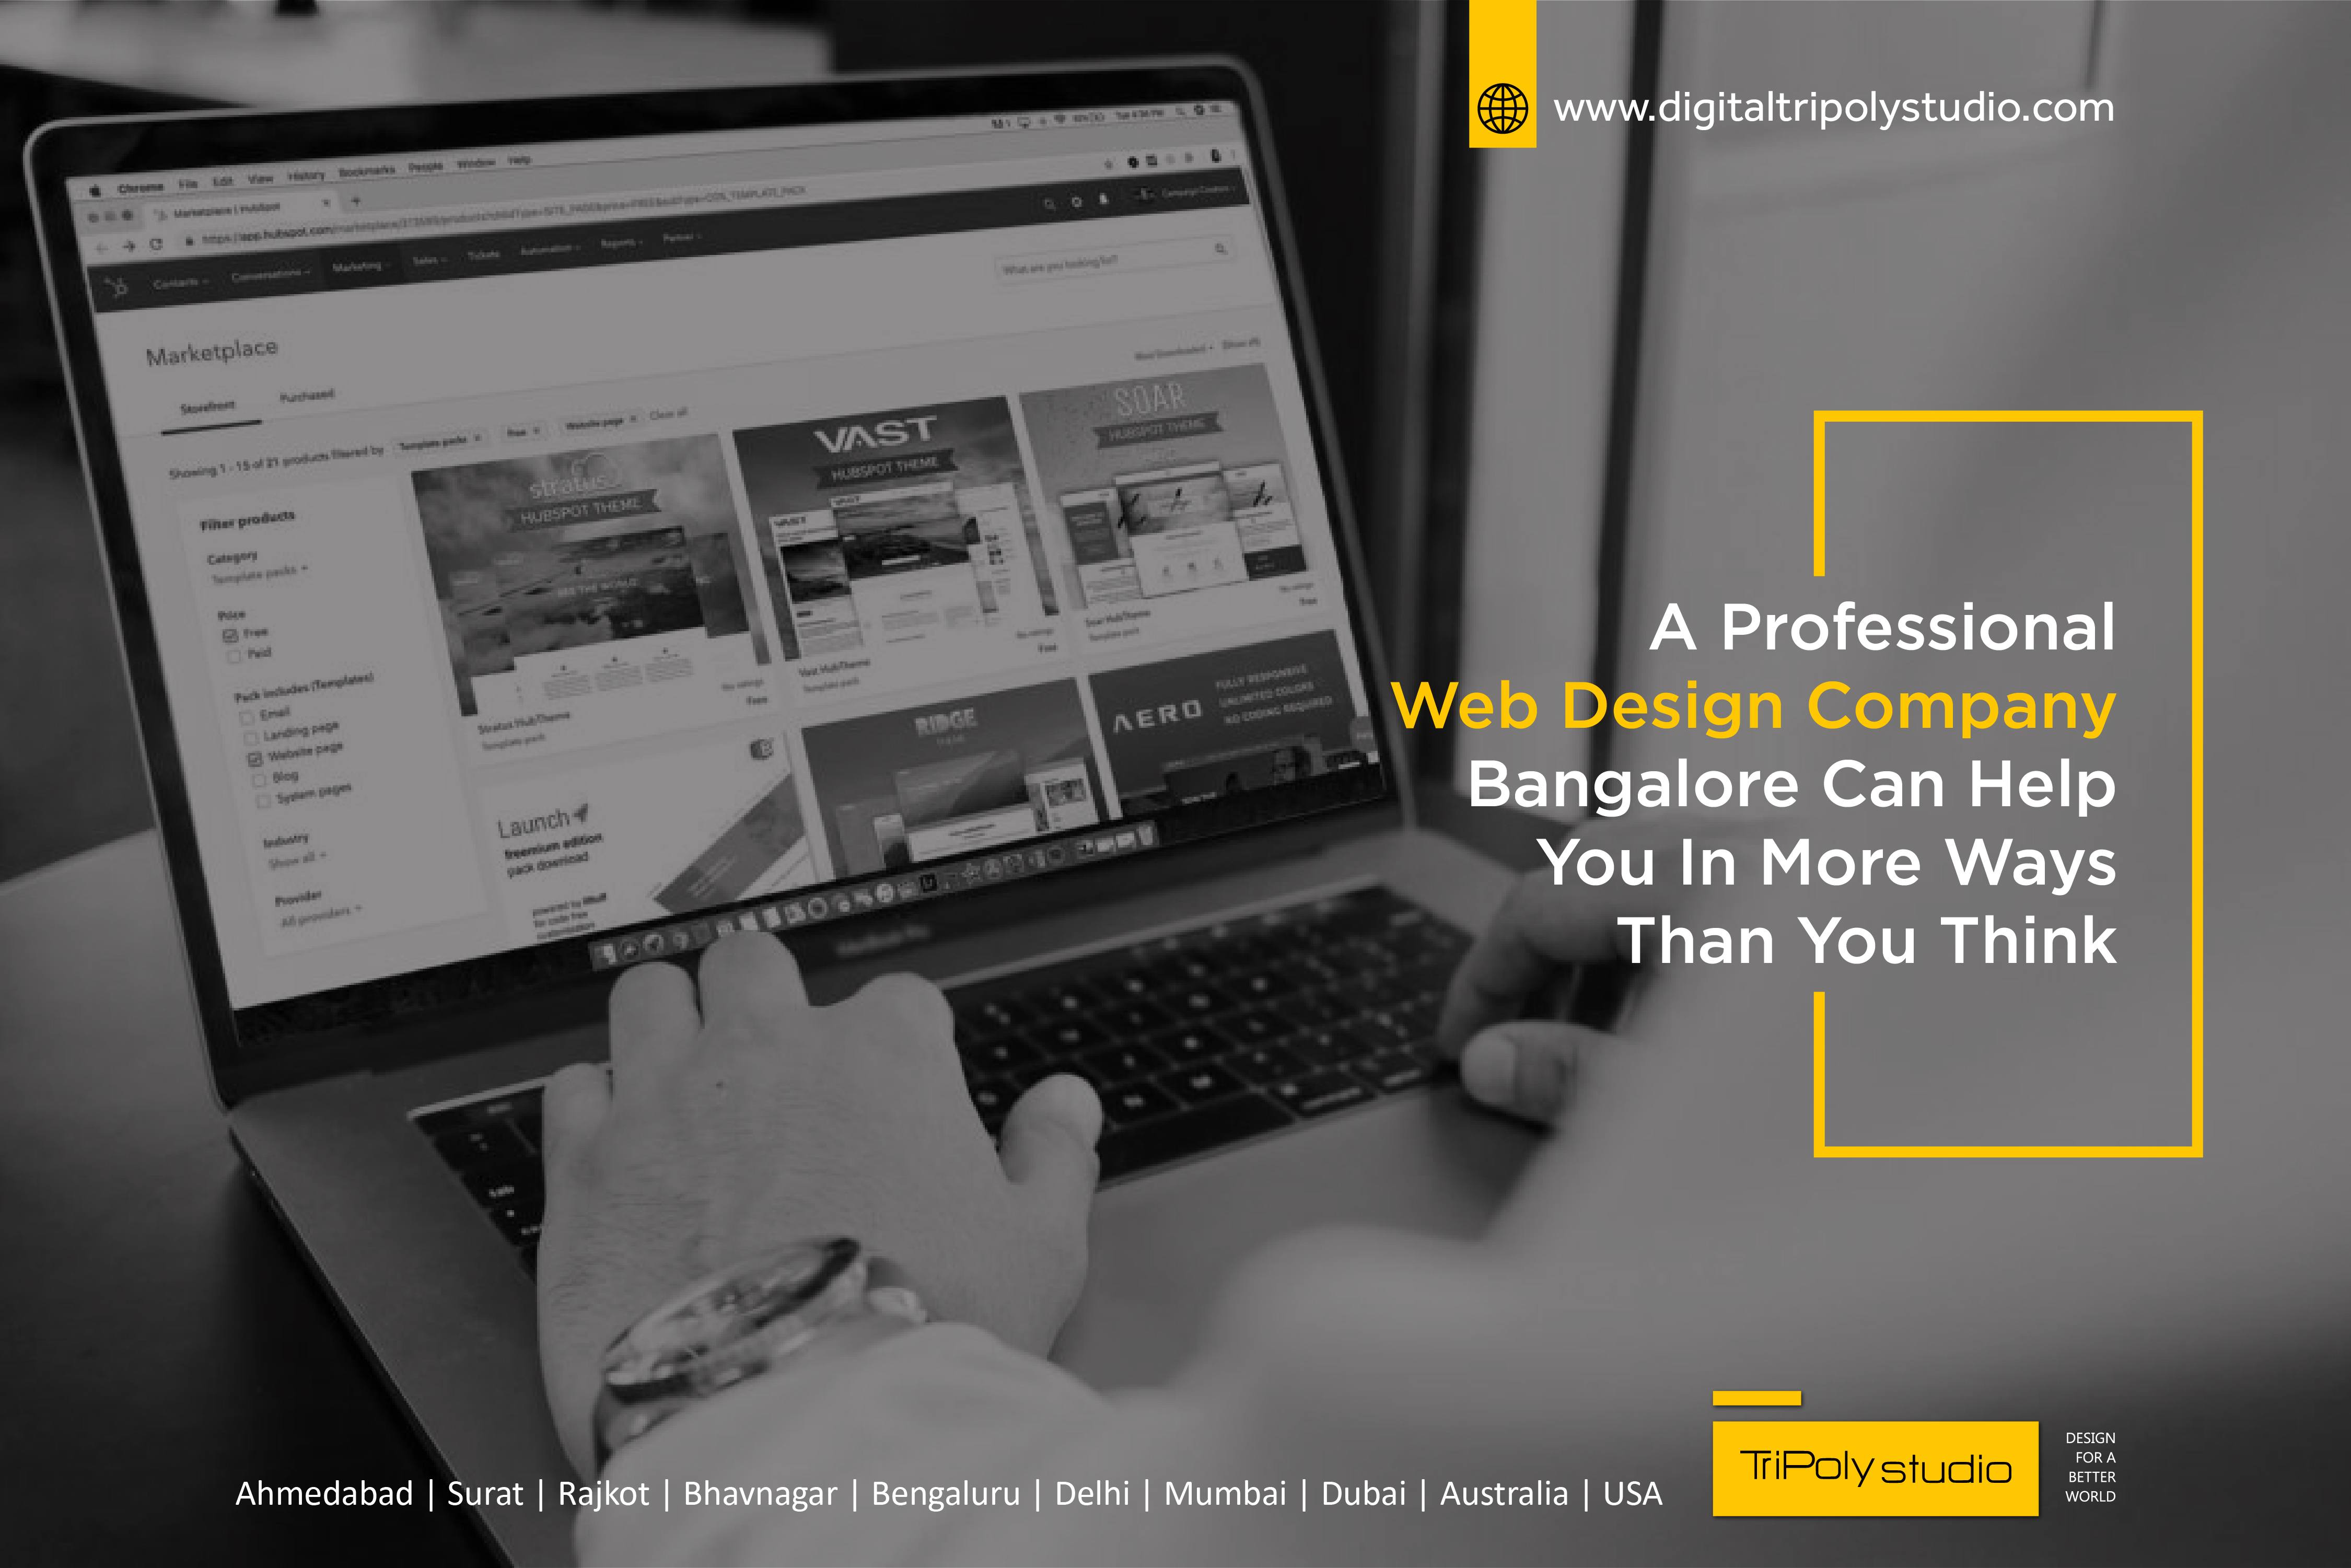 a professional web design company bangalore can help you in more ways than you think